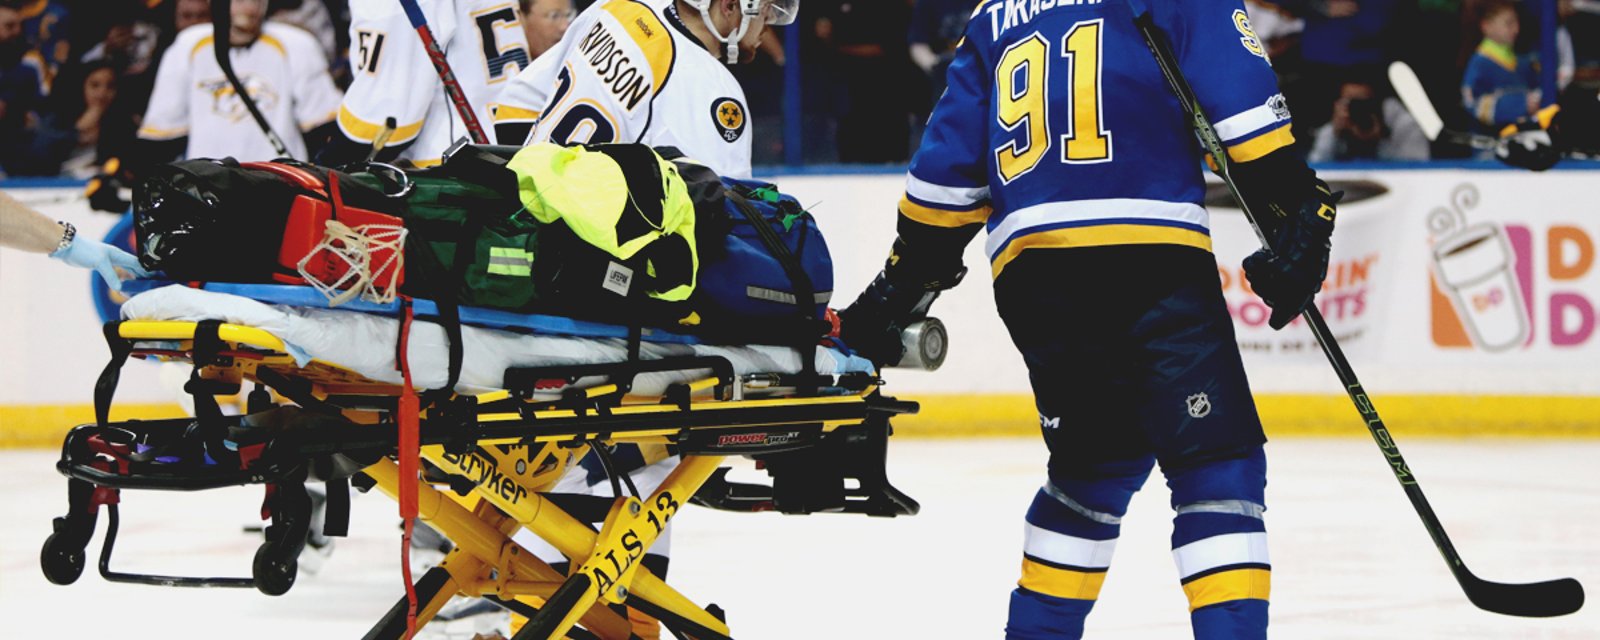 BREAKING: DEVASTATING update on Kevin Fiala after SCARY injury.